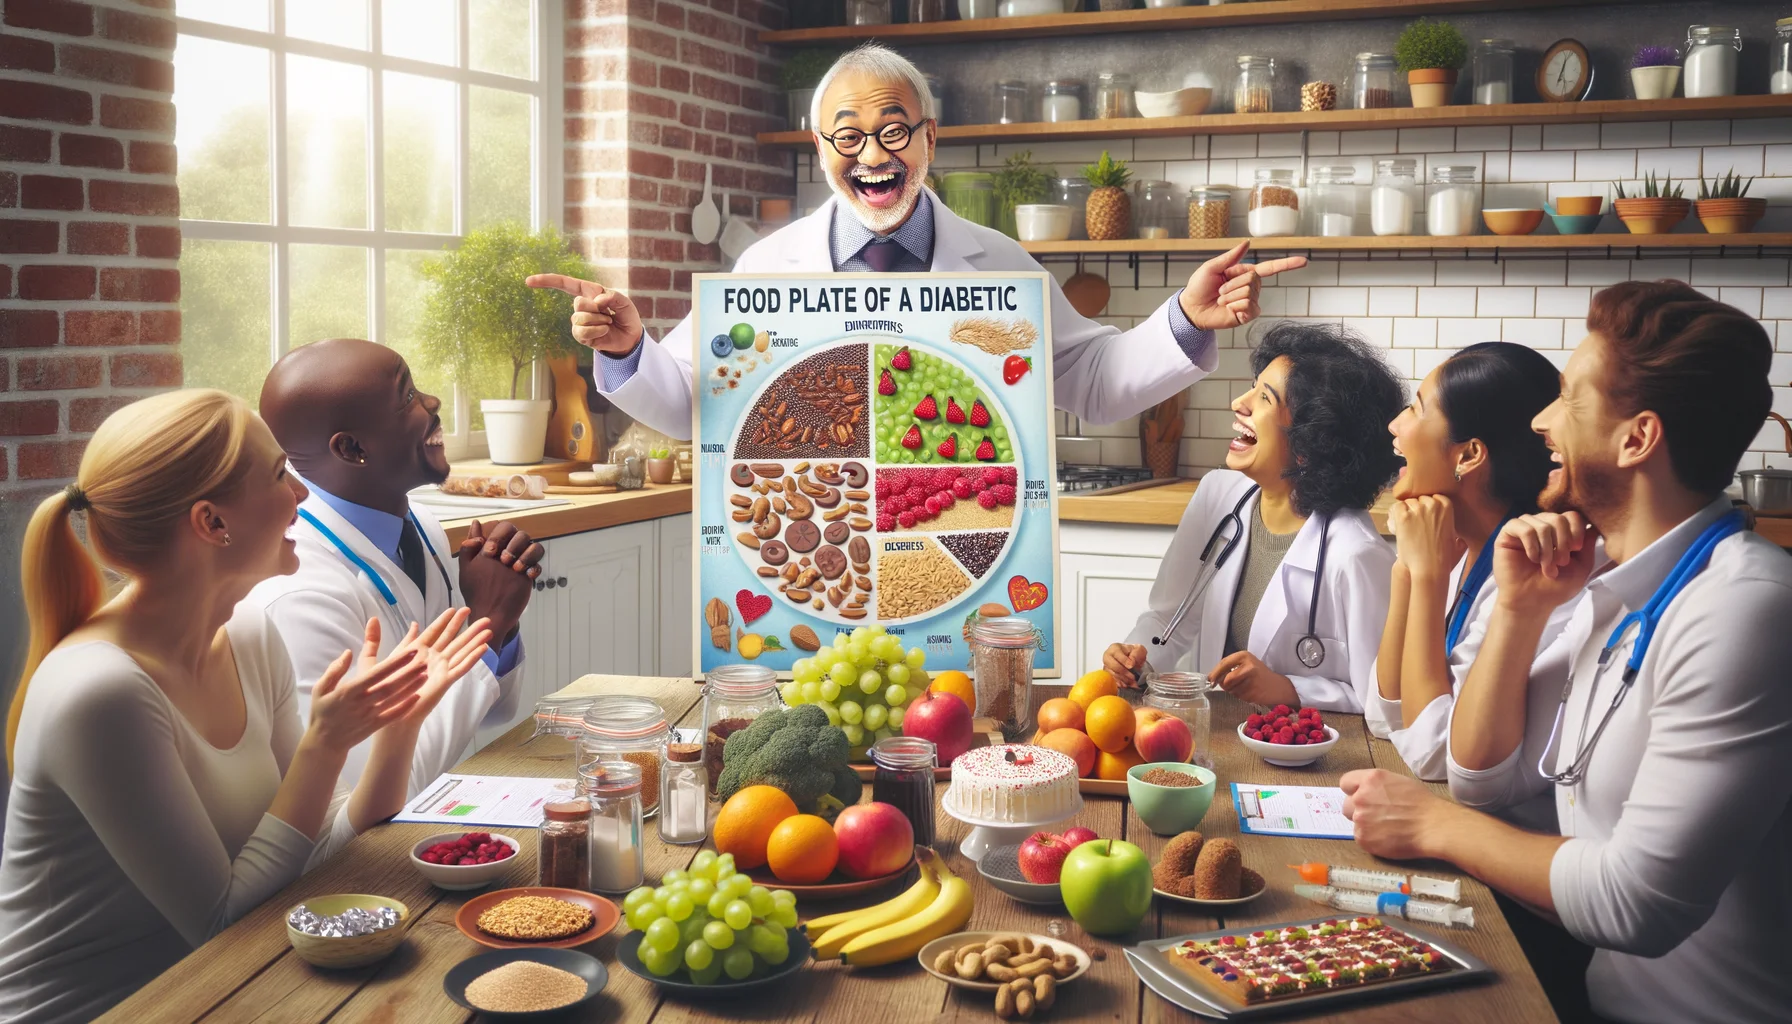 Create a realistic, humorous image of a charming scene rooted in health and wellness. The setting is a beautiful, clean kitchen, filled with beautifully arranged sugar-free sweets. A middle-aged Caucasian man, portraying nutritionist, is conducting a lively workshop. He is pointing at a large, colorful poster of the 'Food Plate of a Diabetic', with a cheeky smile. Attendees involve a South Asian female doctor learning intently and a young Black male, chuckling as he combines ingredients for a diabetic-friendly sweet dish. The table is packed with fruits, nuts, whole grains, and sugar alternatives. The general atmosphere is jolly and educational.